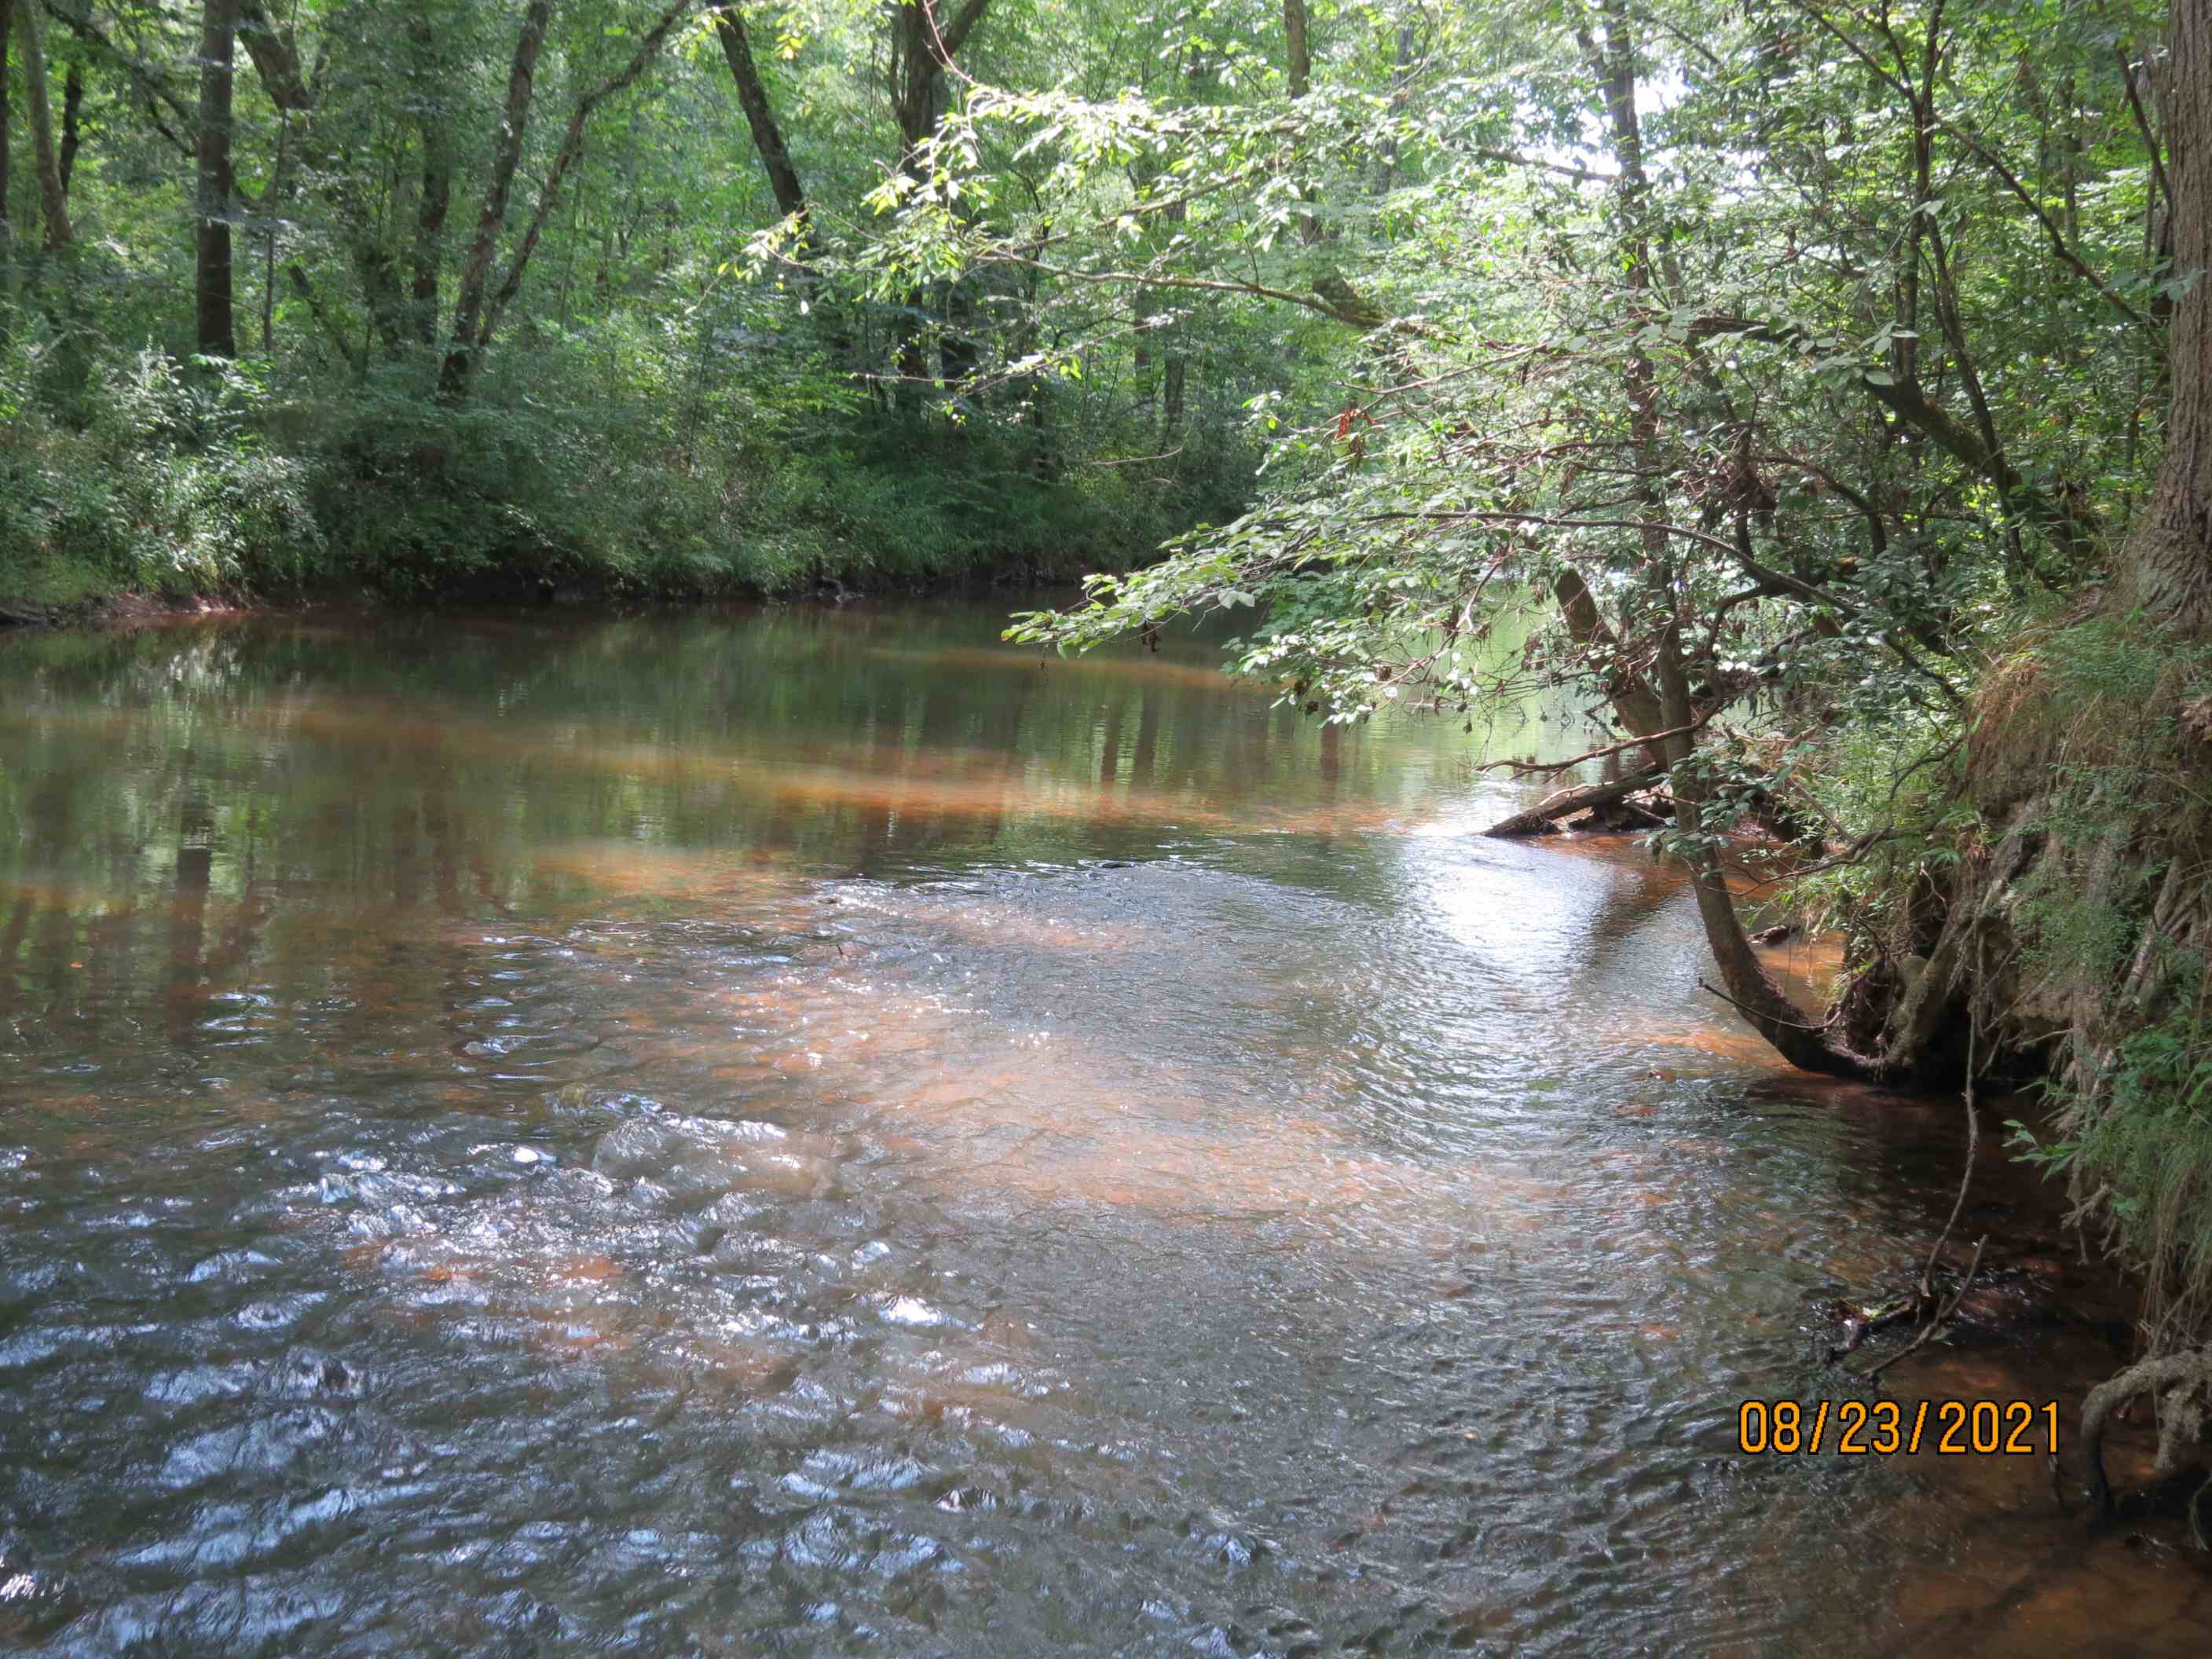 The property fronts for about 400 feet on Yellow Leaf Creek about 3 miles from where it flows into the Coosa River